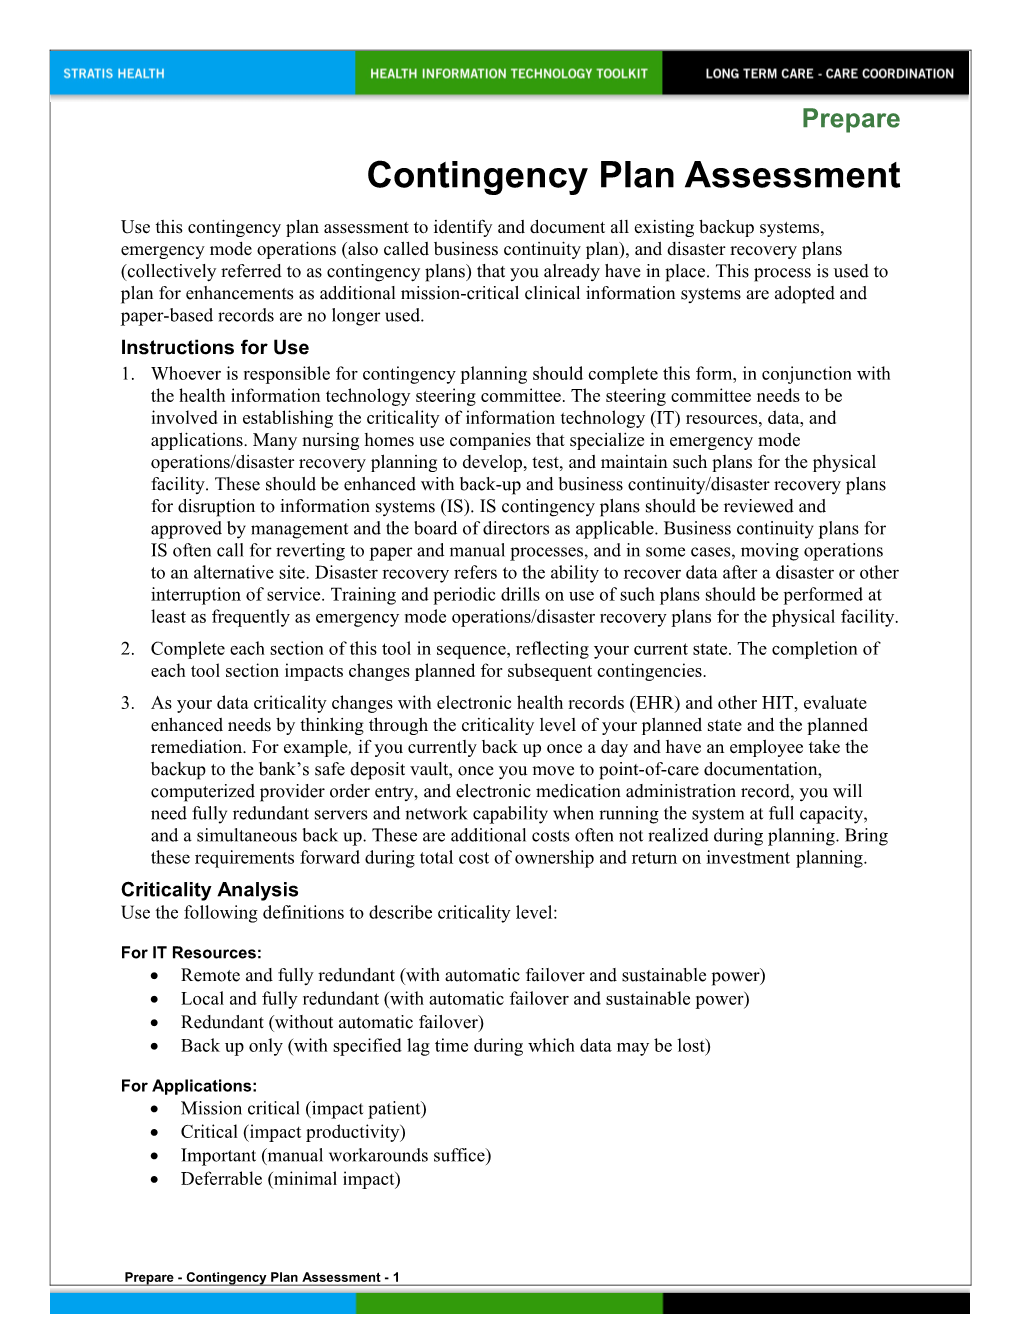 Contingency Plan Assessment Health Information Technology Toolkit for Long Term Care